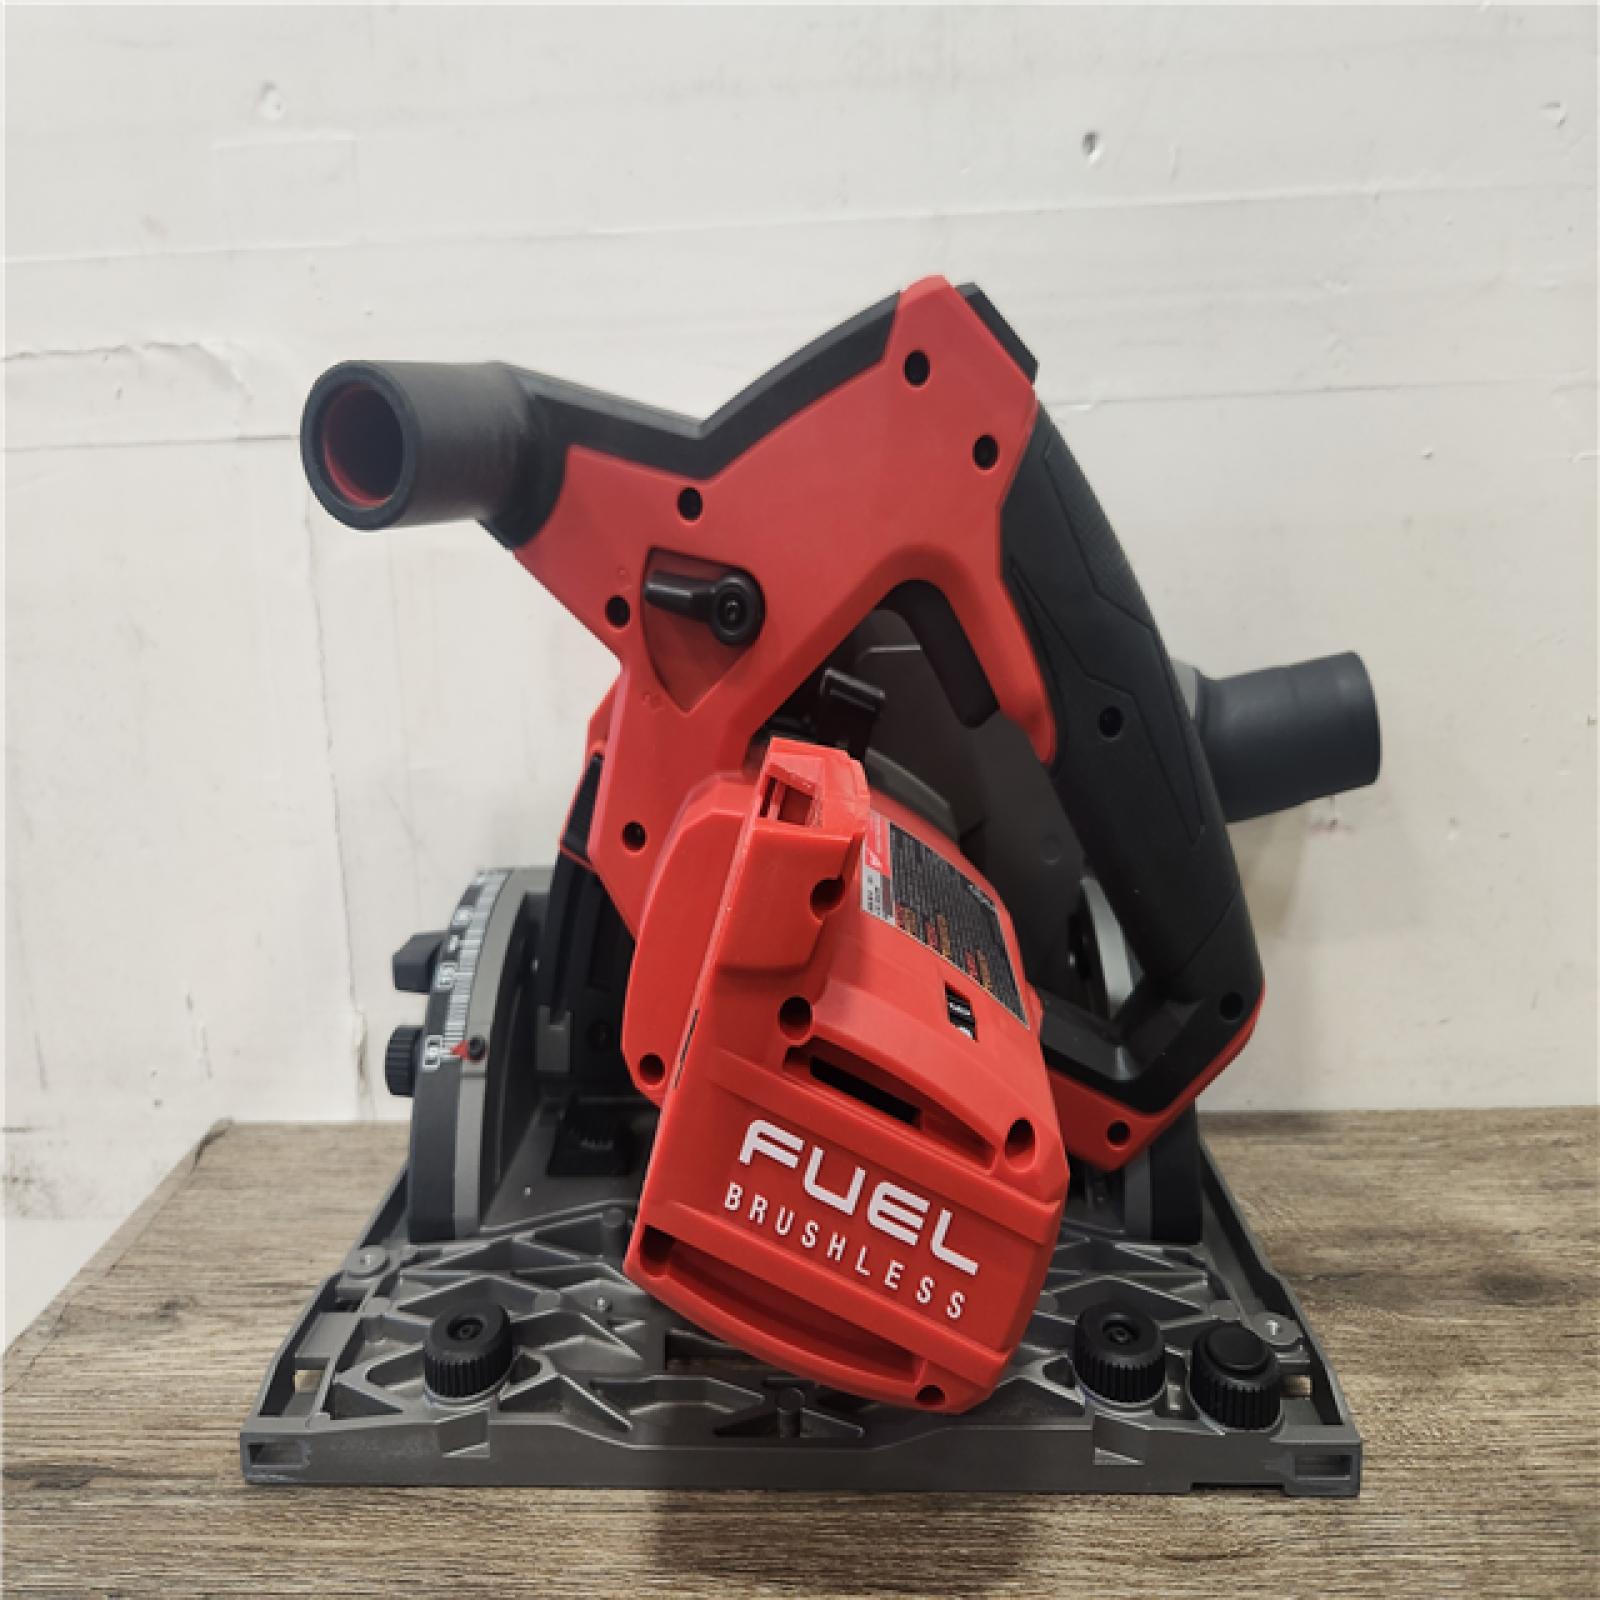 Phoenix Location Appears NEW Milwaukee M18 FUEL 18V Lithium-Ion Cordless Brushless 6-1/2 in. Plunge Cut Track Saw (Tool-Only) 2831-20